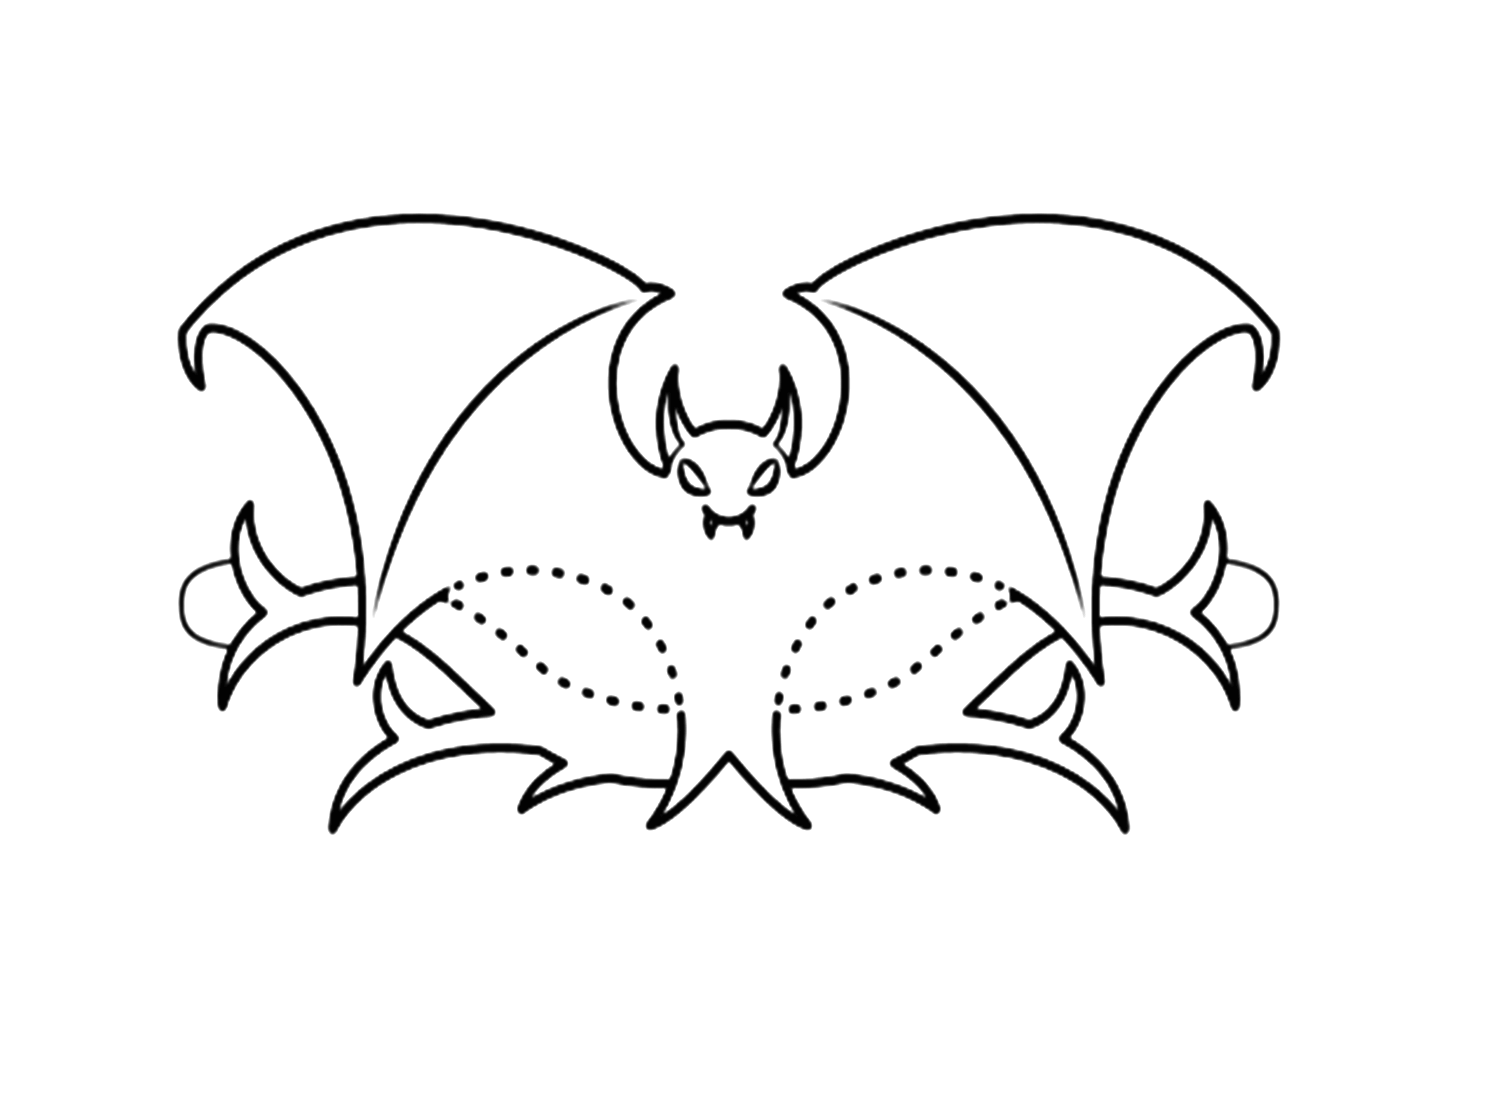 Halloween Bat Mask Coloring Pages